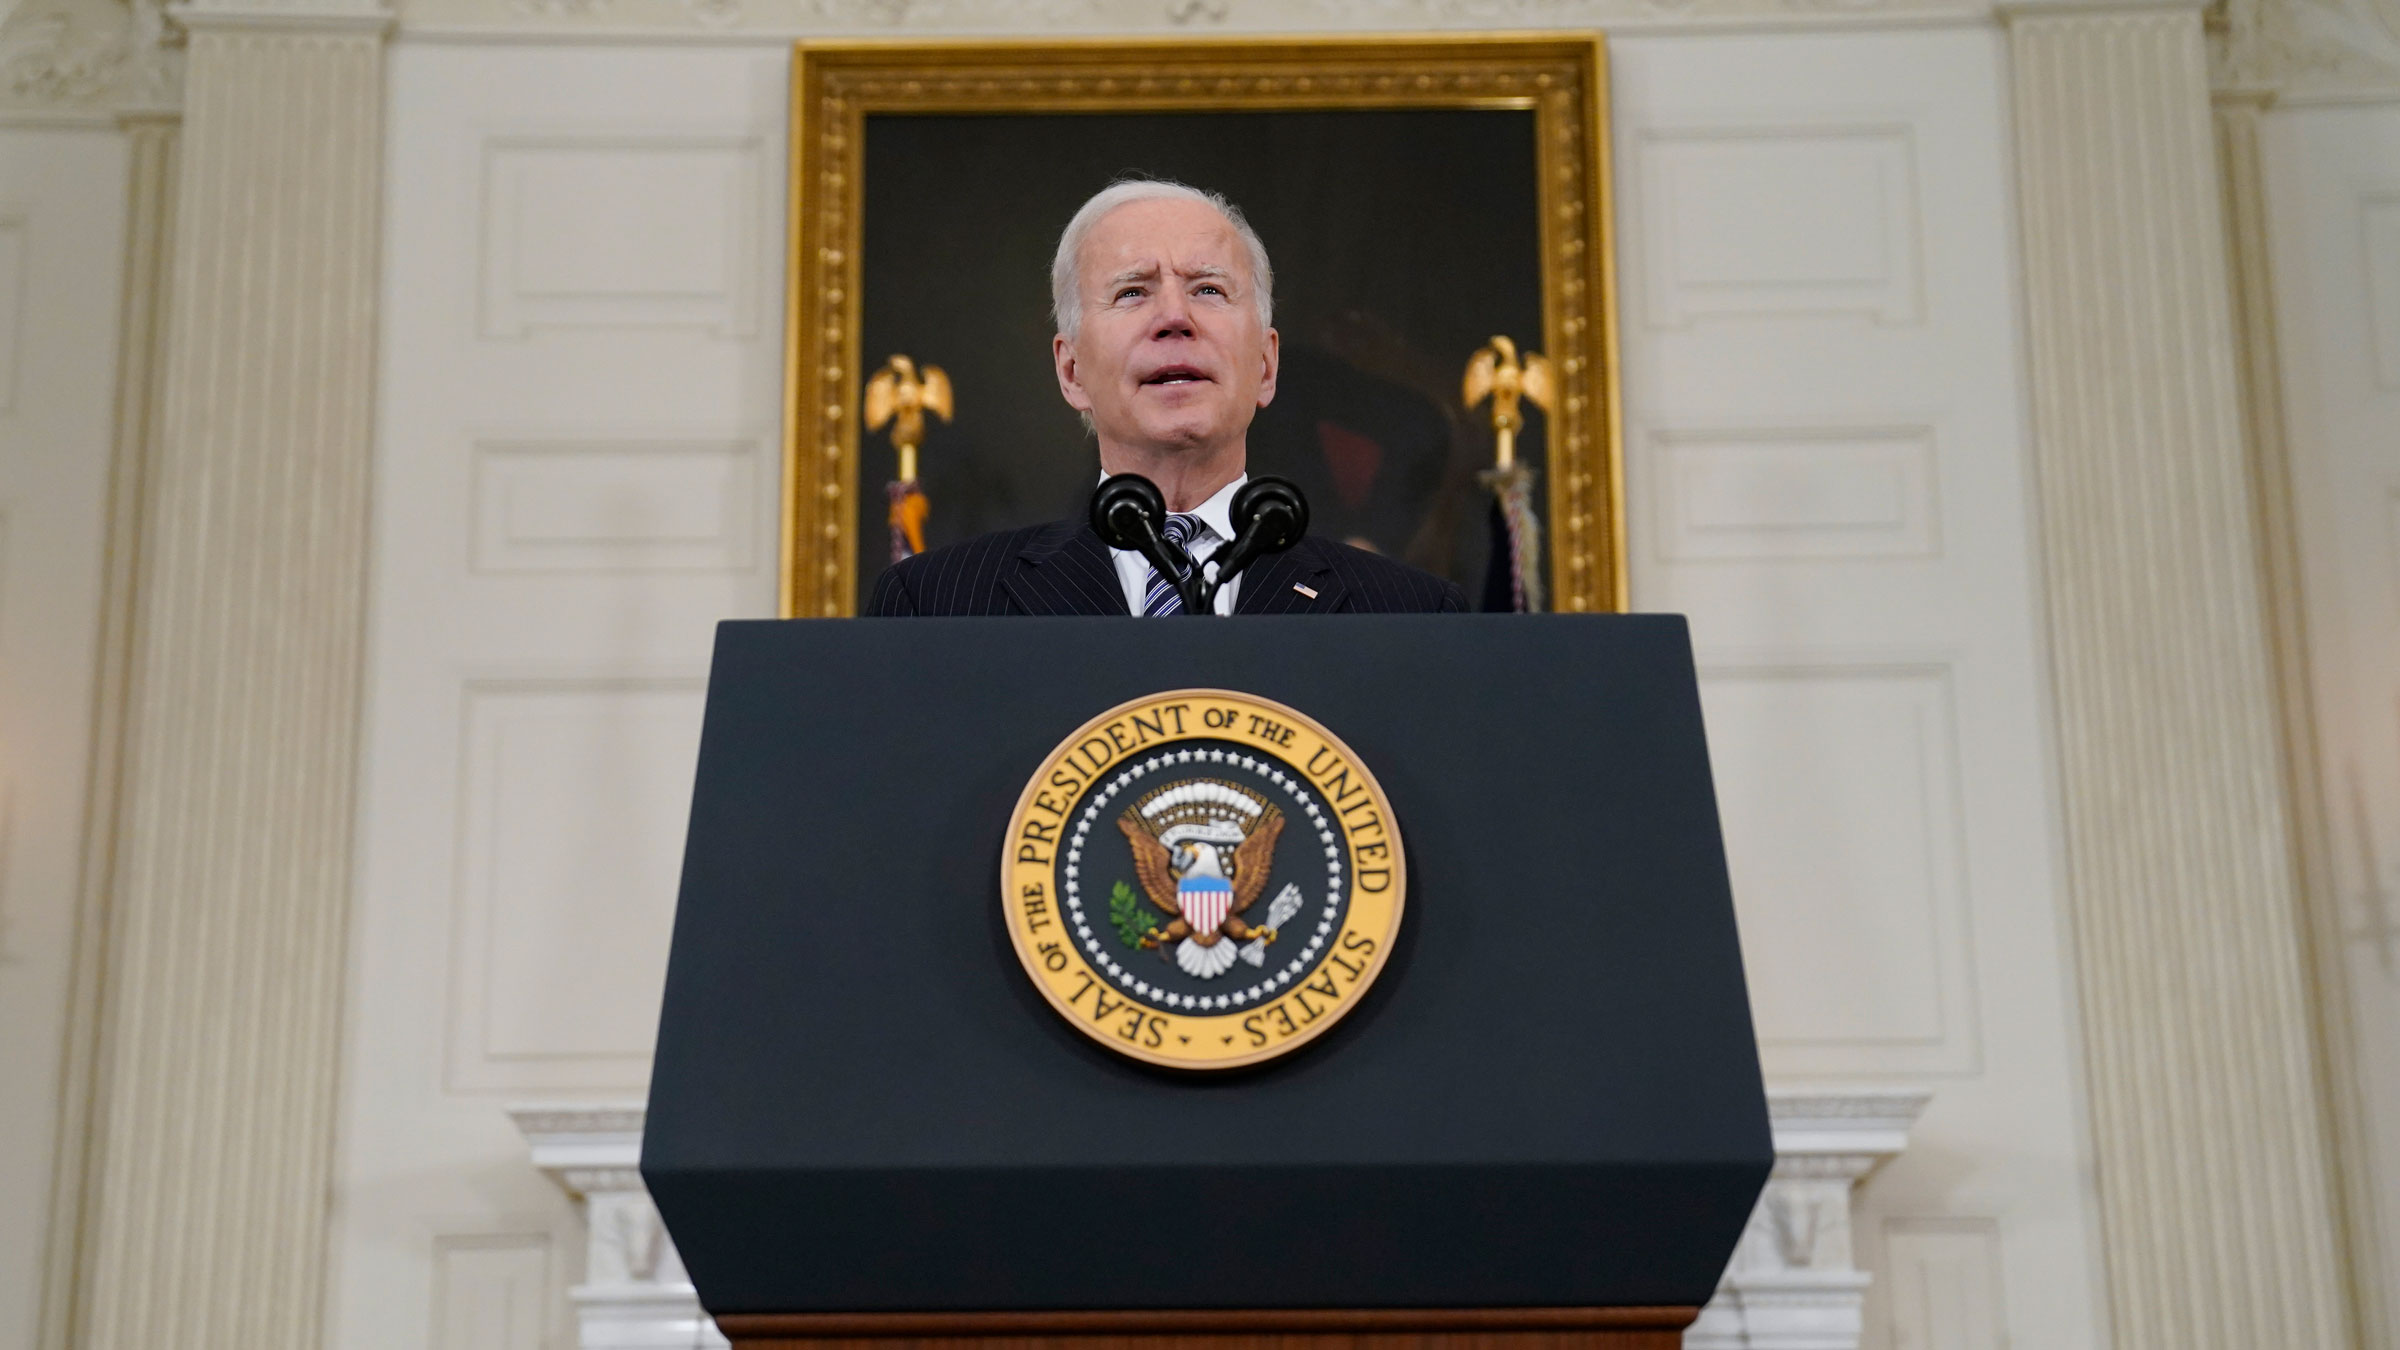 Biden raises deadline for all US adults to be eligible for Covid-19 vaccine – April 19 instead of May 1